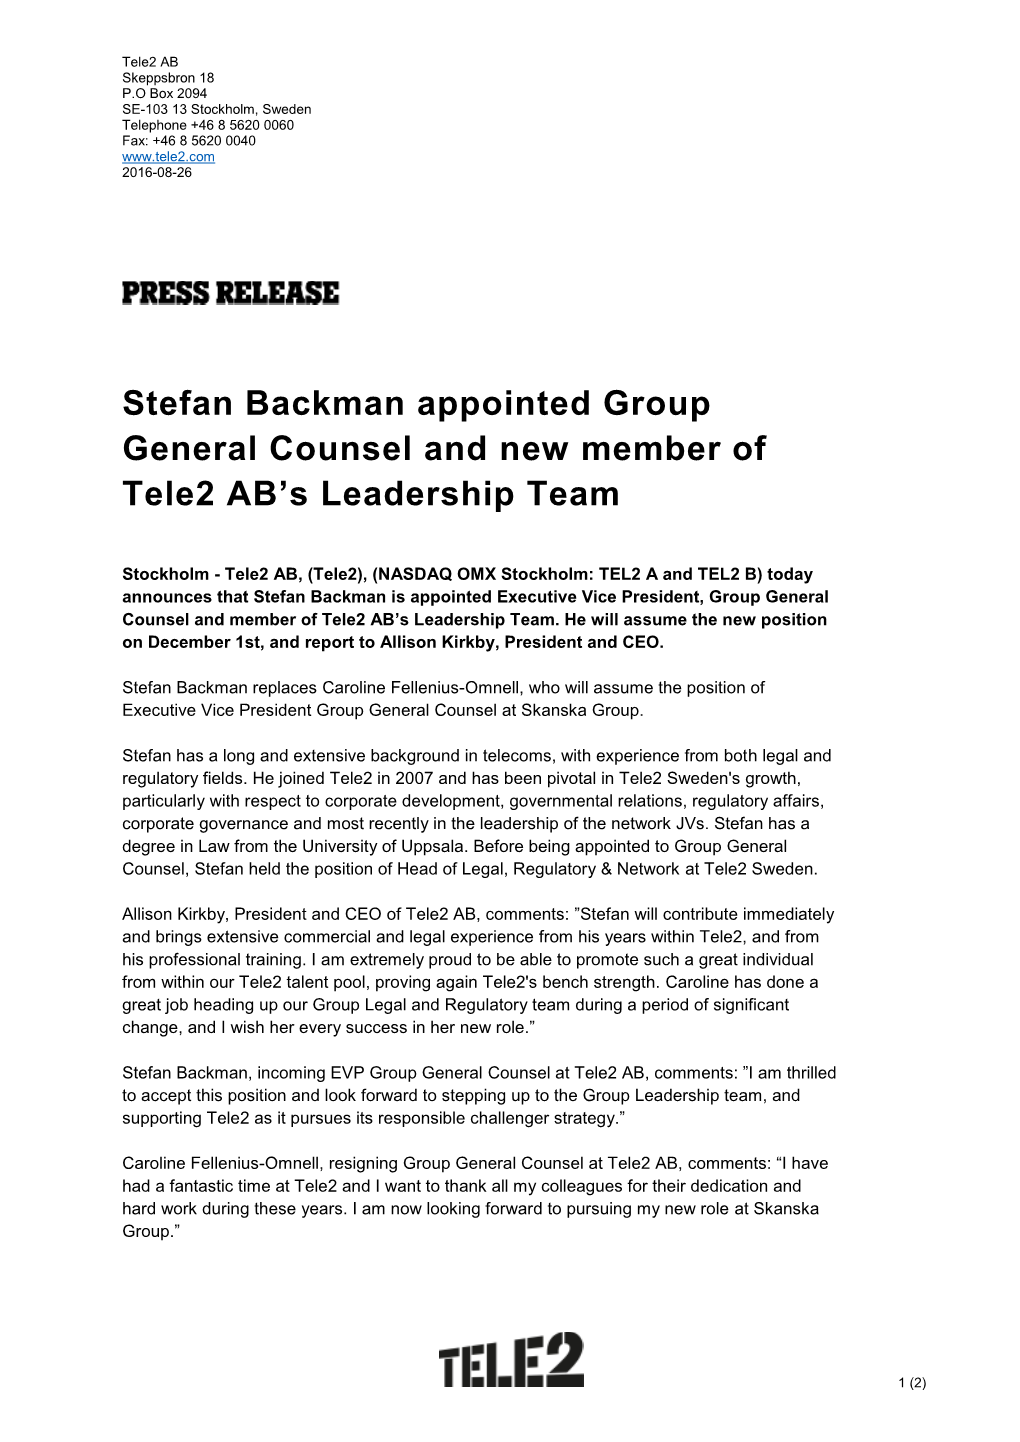 Stefan Backman Appointed Group General Counsel and New Member of Tele2 AB’S Leadership Team